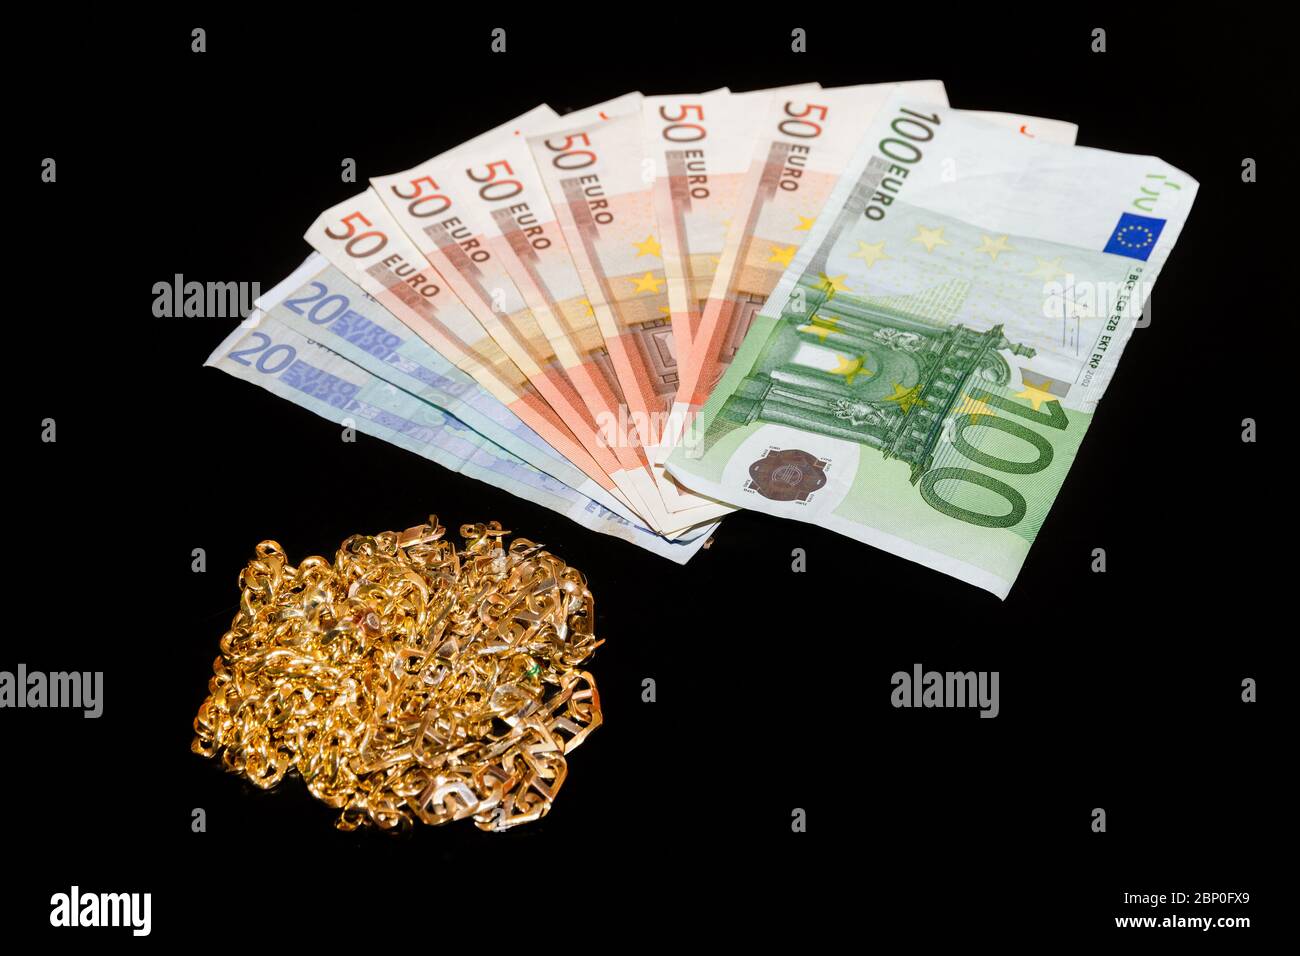 Money and gold jewellery against a black background. Stock Photo